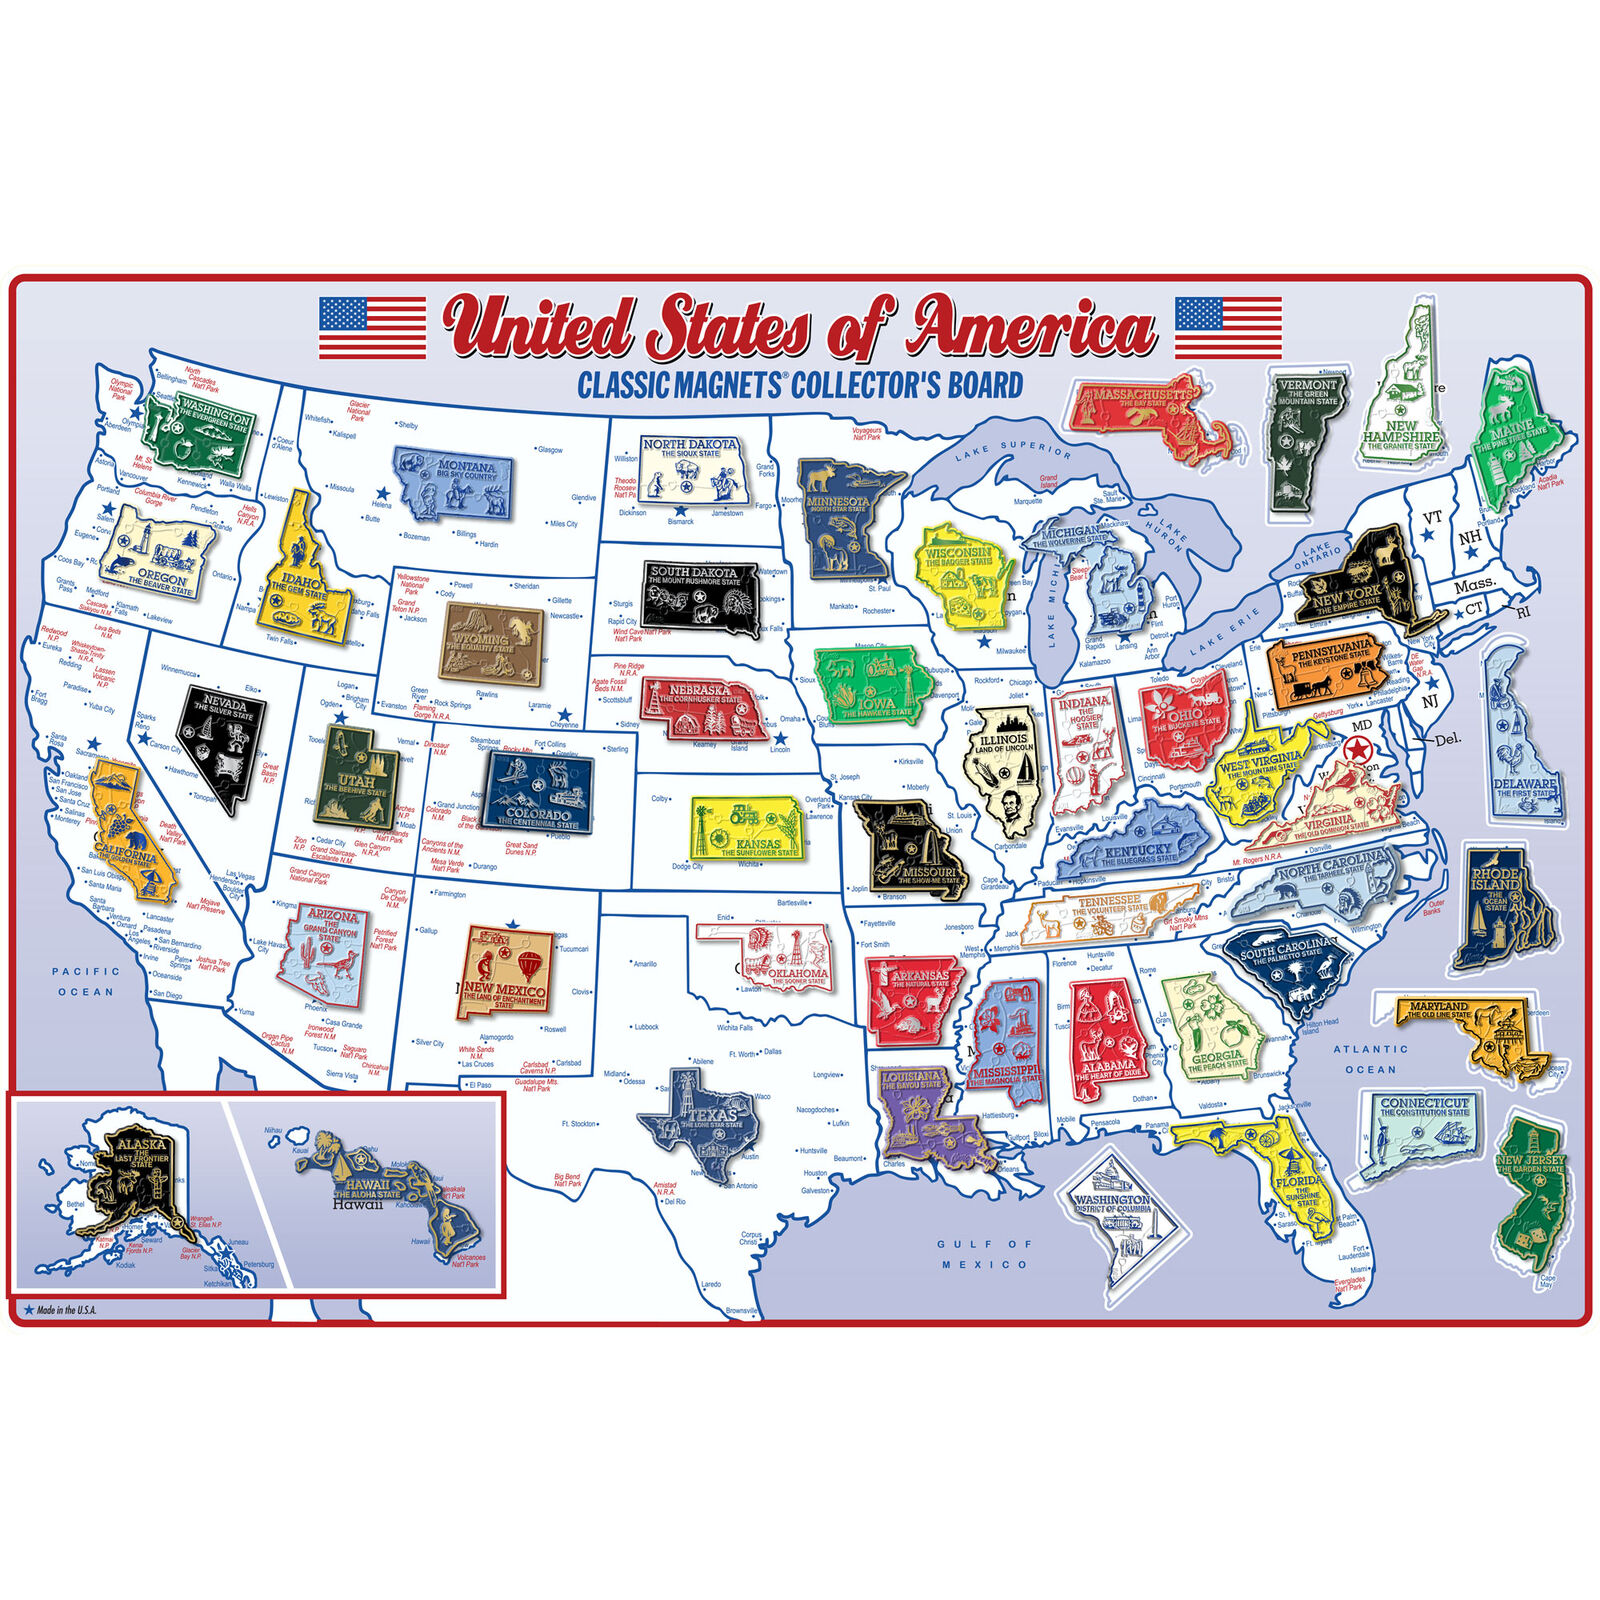 Original State Magnet Collector's Set - 51 Magnets with Metal Display Board